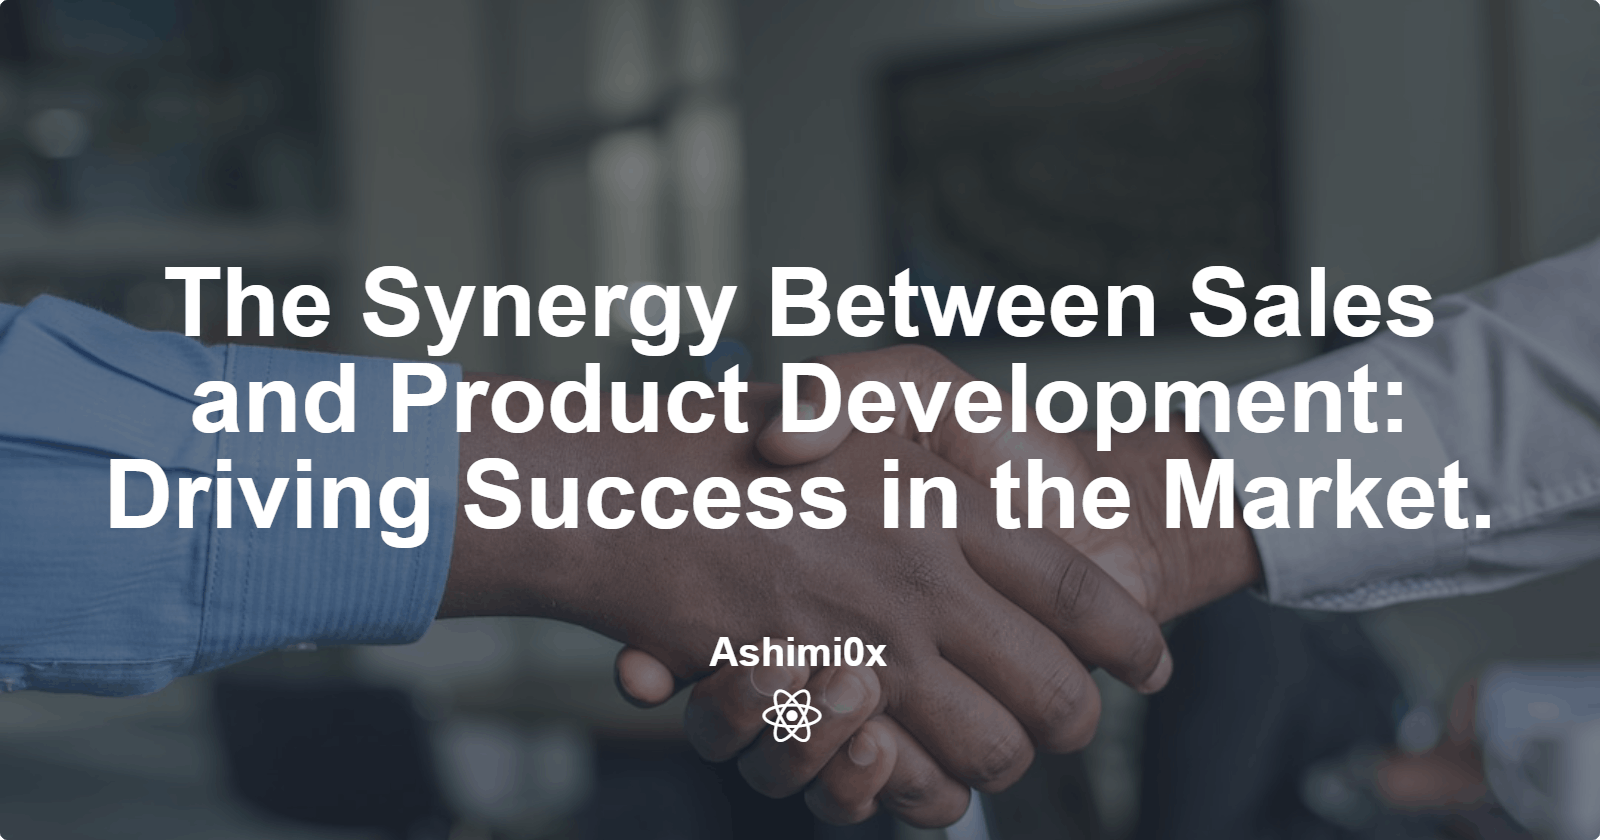 The Synergy Between Sales and Product Development: Driving Success in the Market.